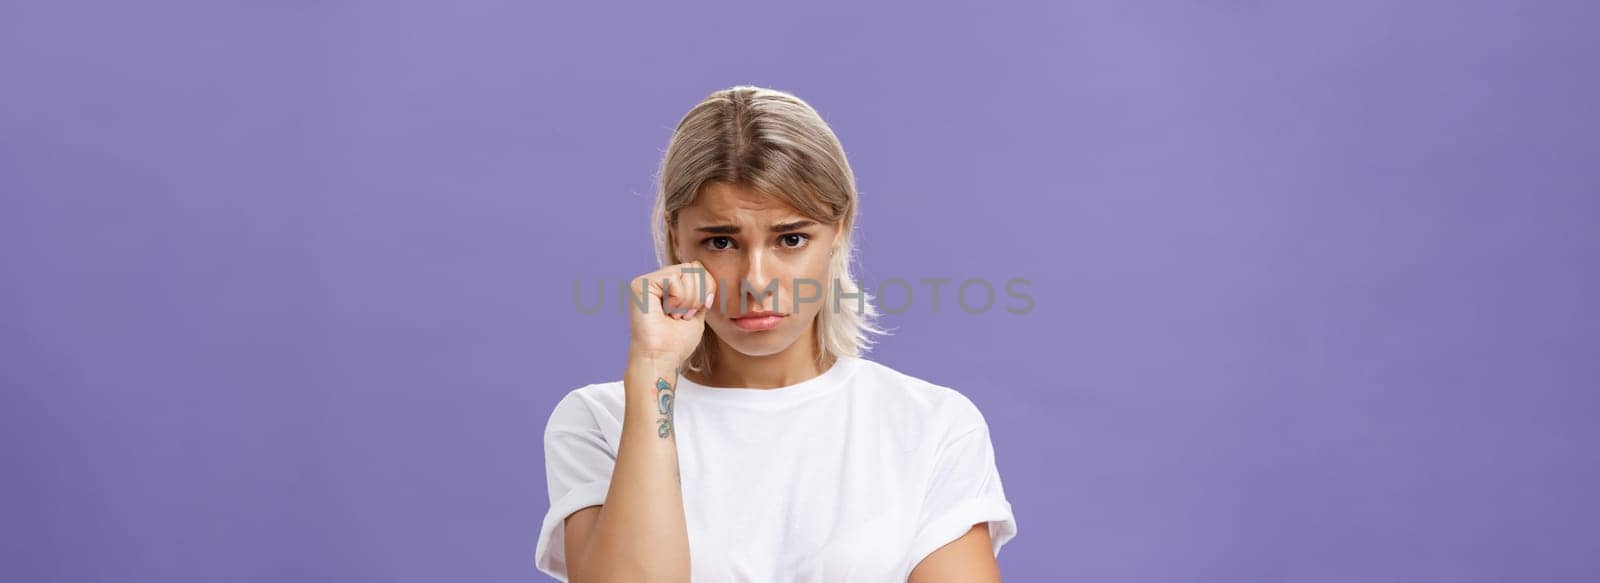 Studio shot of offended sad and timid silly woman with blond hairstyle frowning looking from under forehead holding fist near eye as if whiping teardrop being upset over purple background by Benzoix